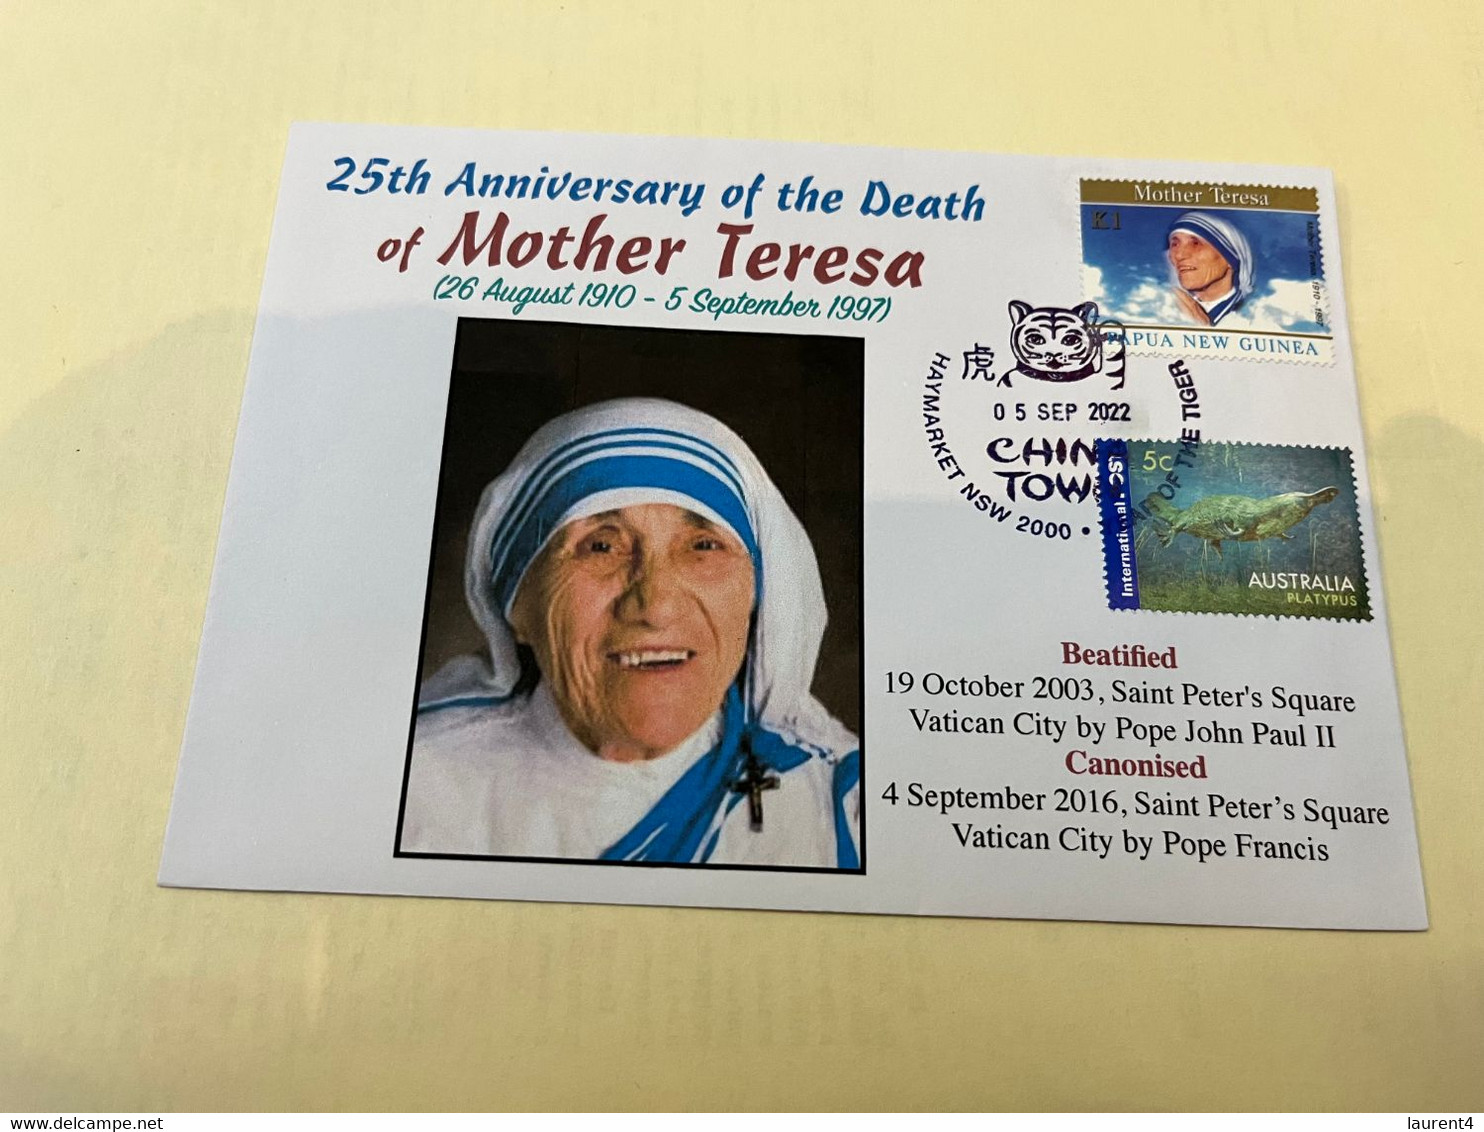 (2 J 44) 25th Anniversary Of The Death Of Mother Teresa In India On 5 Sep. 1997 - Papua New Guinea M. Teresa Stamp - Mère Teresa